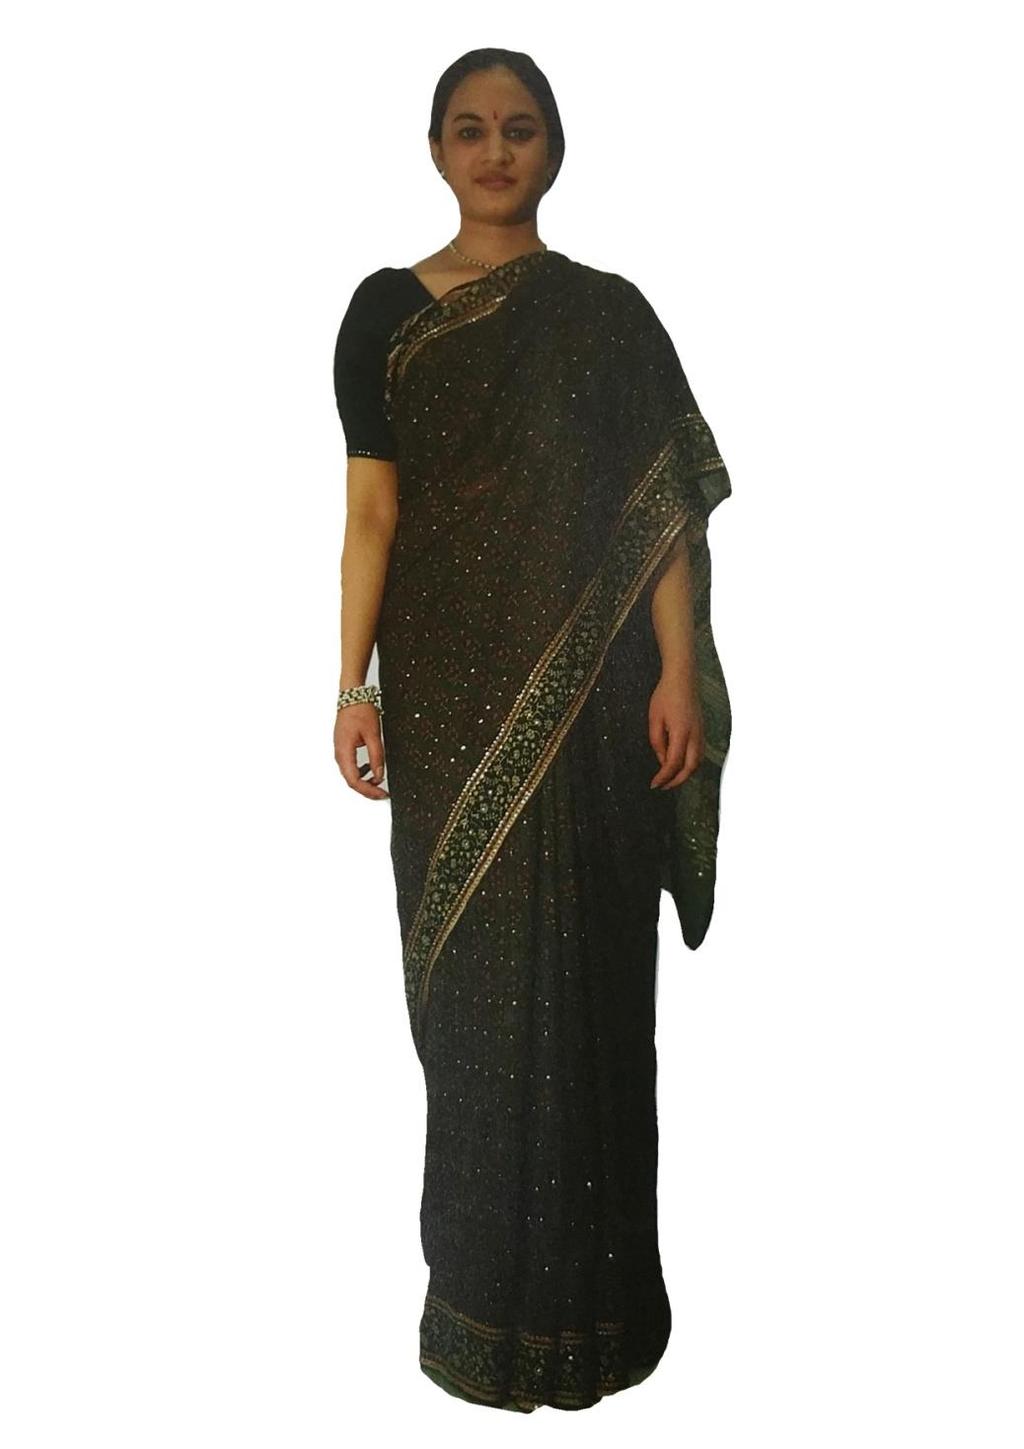 Traditional styles of saree draping communicate the area of the wearer as well.